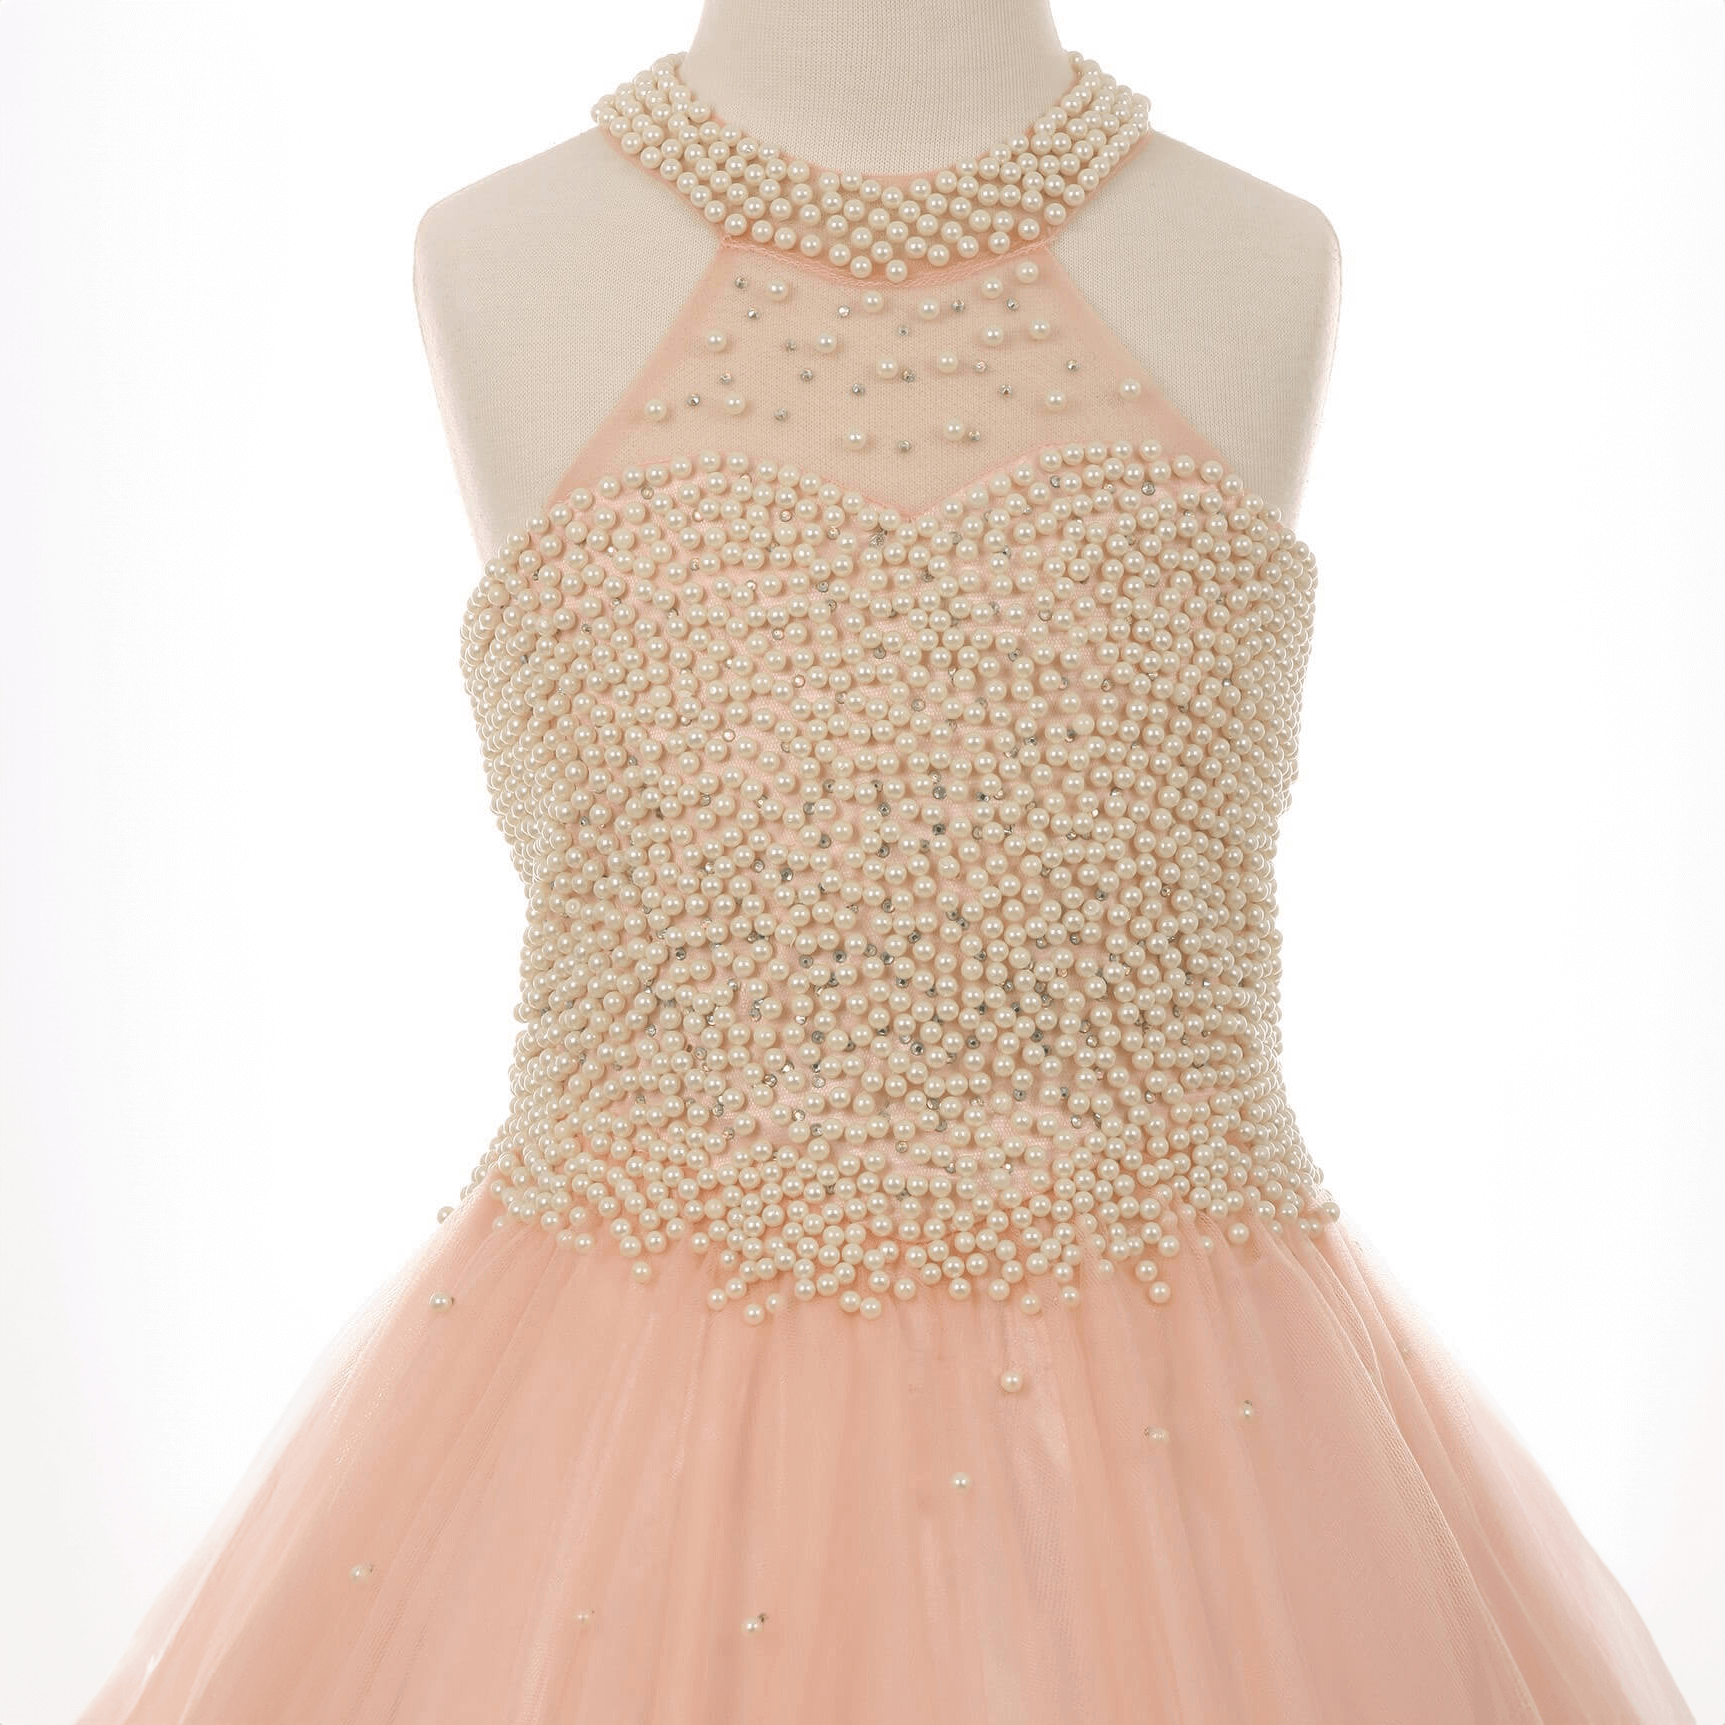 beaded detail on a  Girls princess style dress from The Fairy Princess Shop